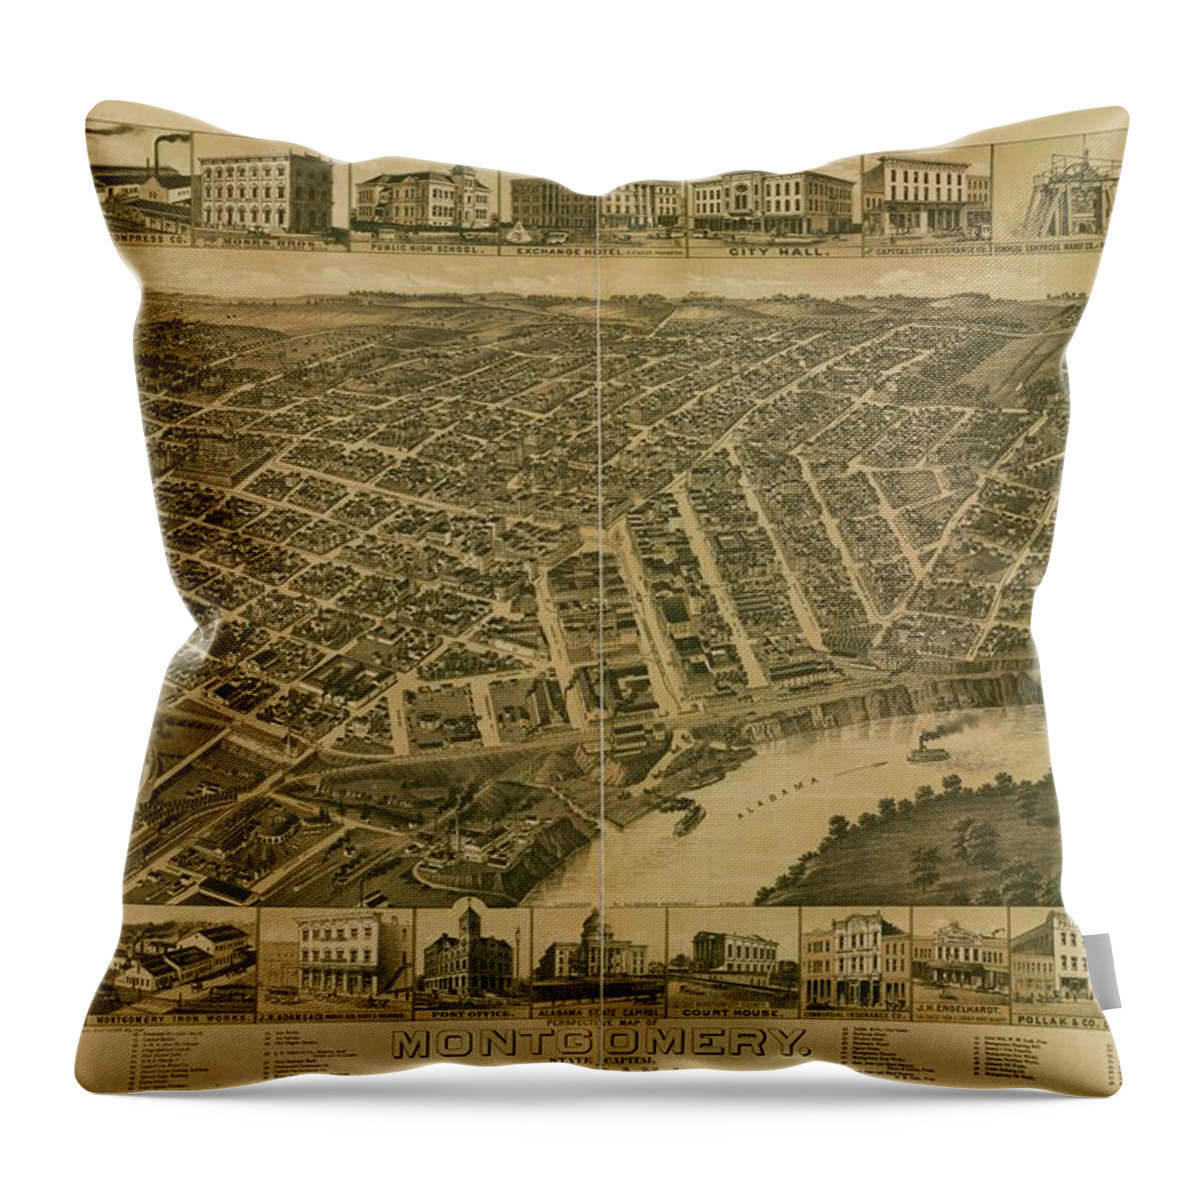 Antique Map Of Montgomery Throw Pillow featuring the drawing Antique Maps - Old Cartographic maps - Antique Perspective Map of Montgomery, Alabama, 1887 by Studio Grafiikka